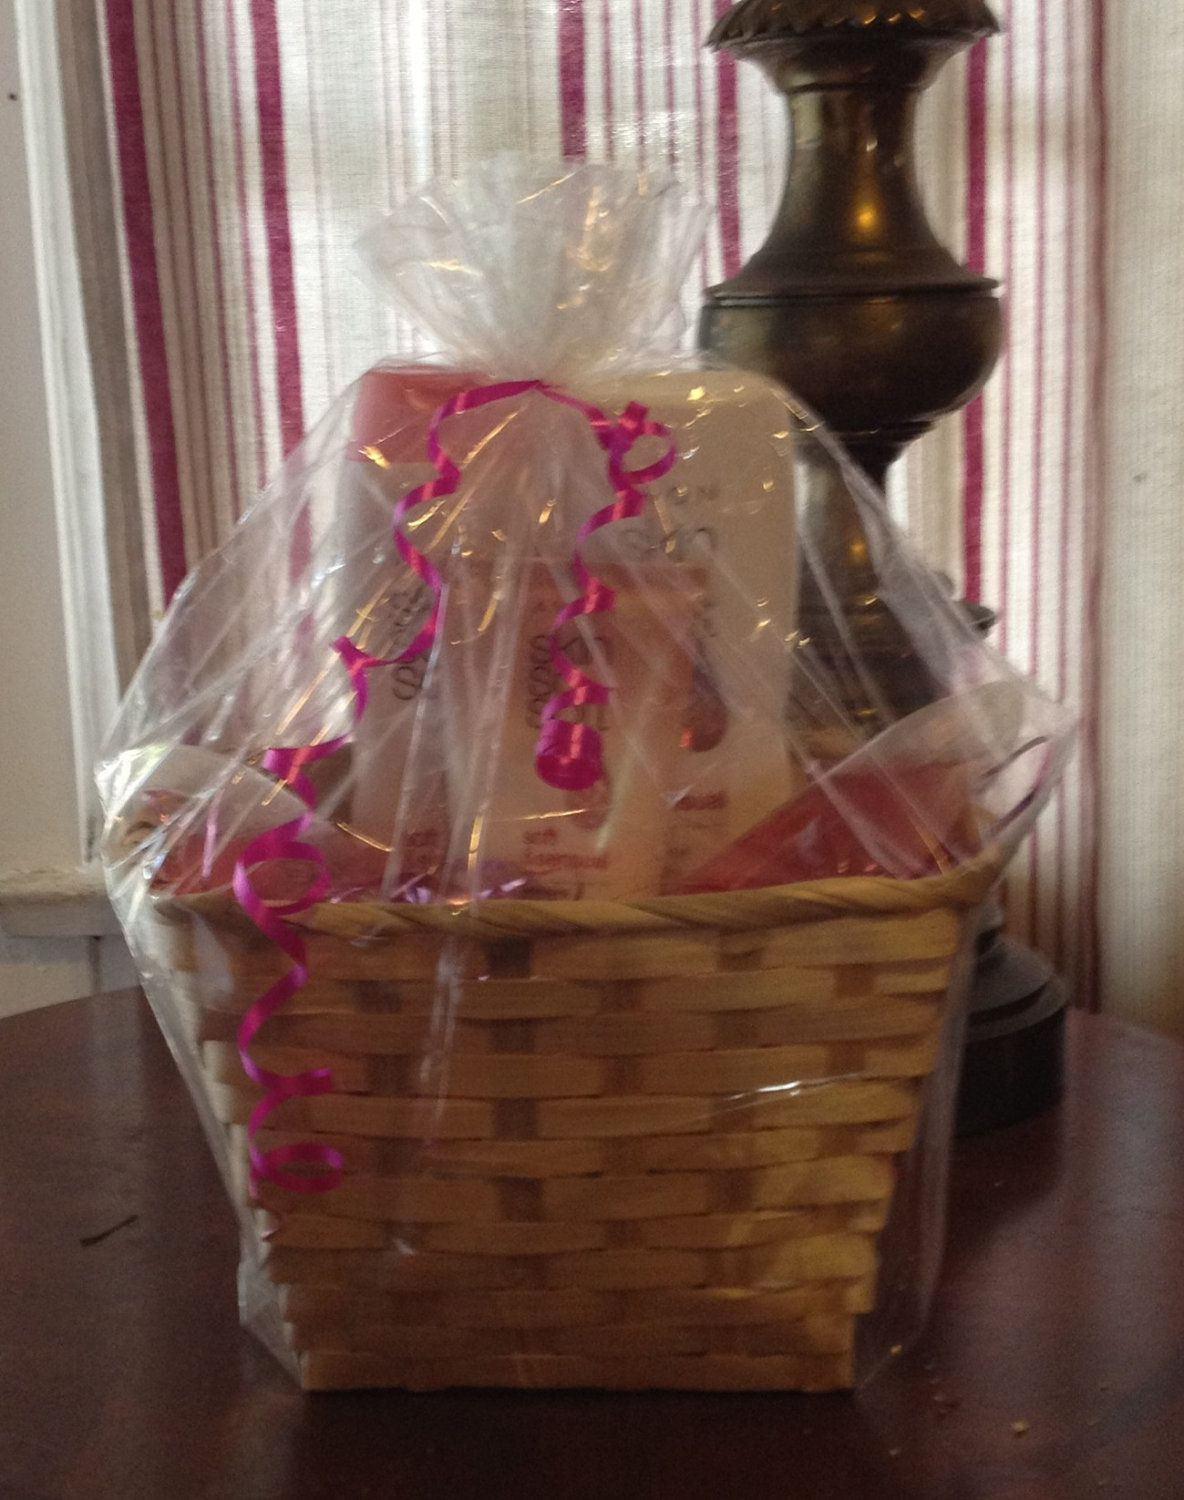 Avon Gift Basket Ideas
 Avon t baskets see more products shop my store